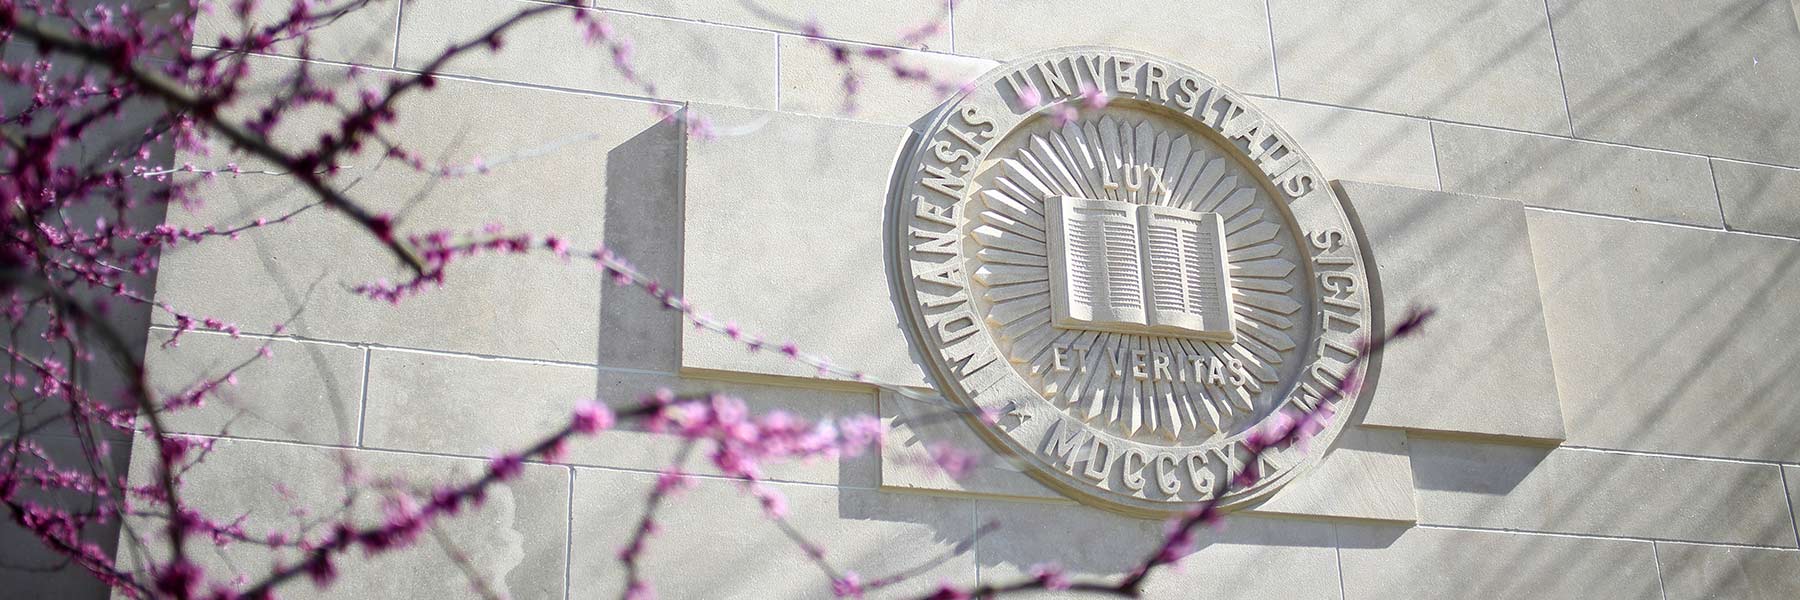 The Indiana University seal on a limestone building with a flowering tree in foreground.